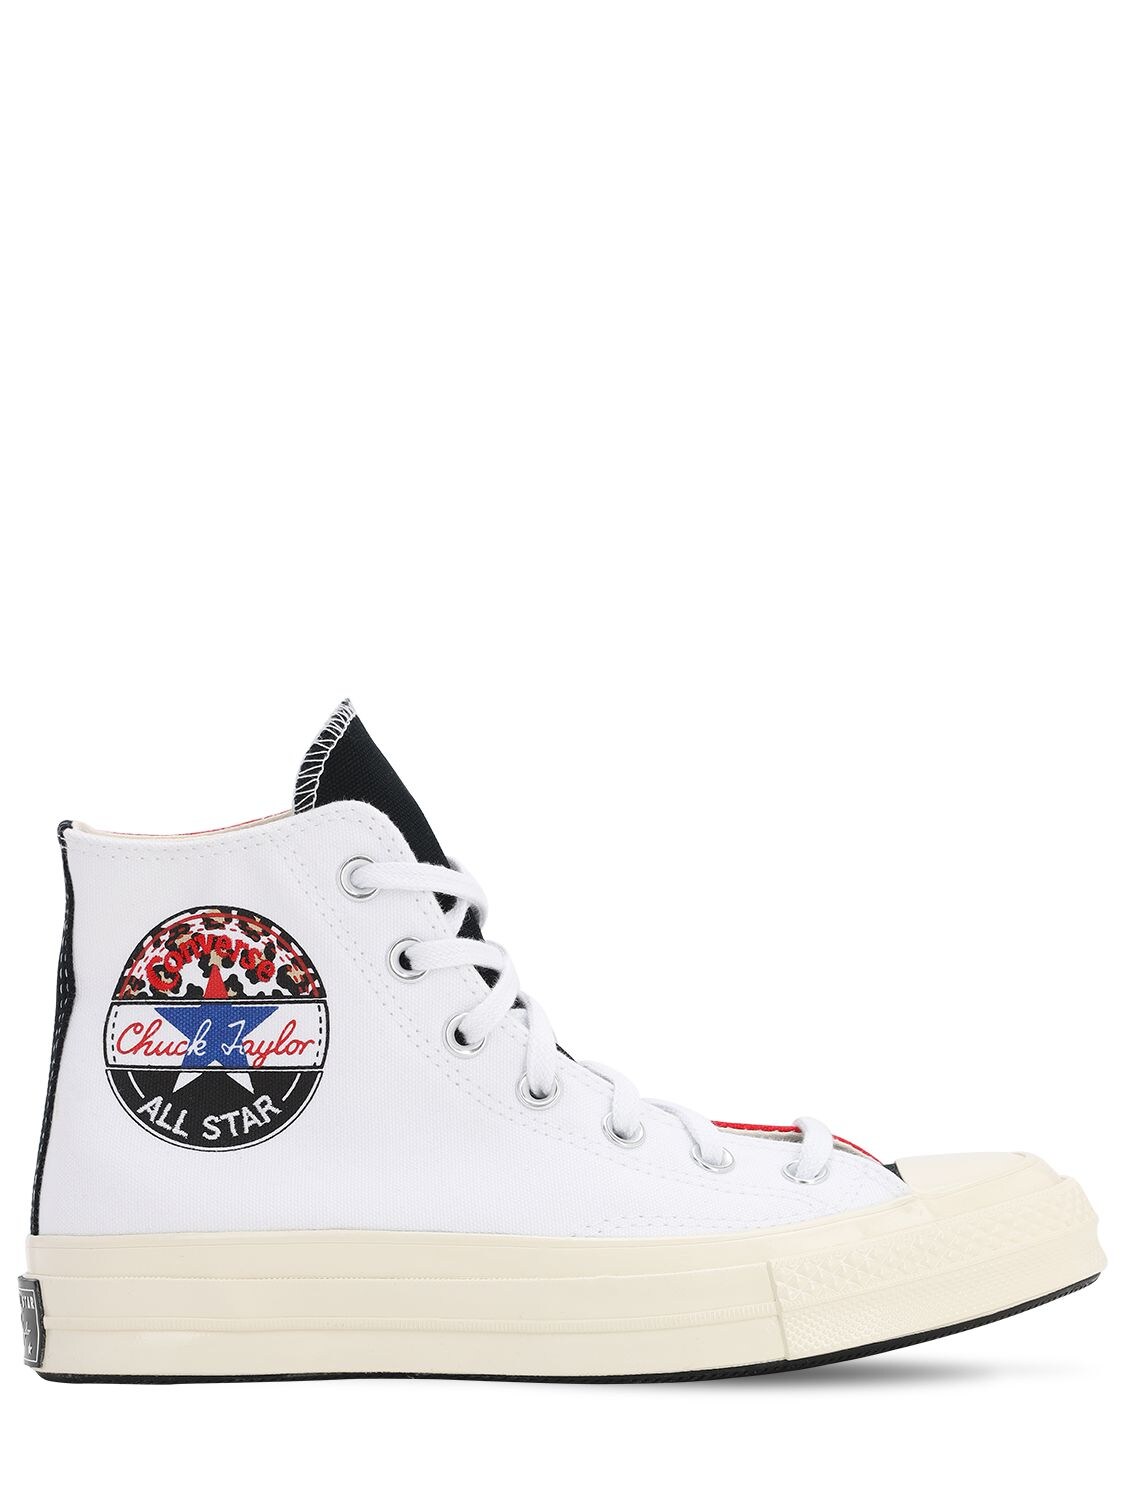 CONVERSE CHUCK 70 HI-TOP trainers,71IWY5003-UKVEL1DISVRF0